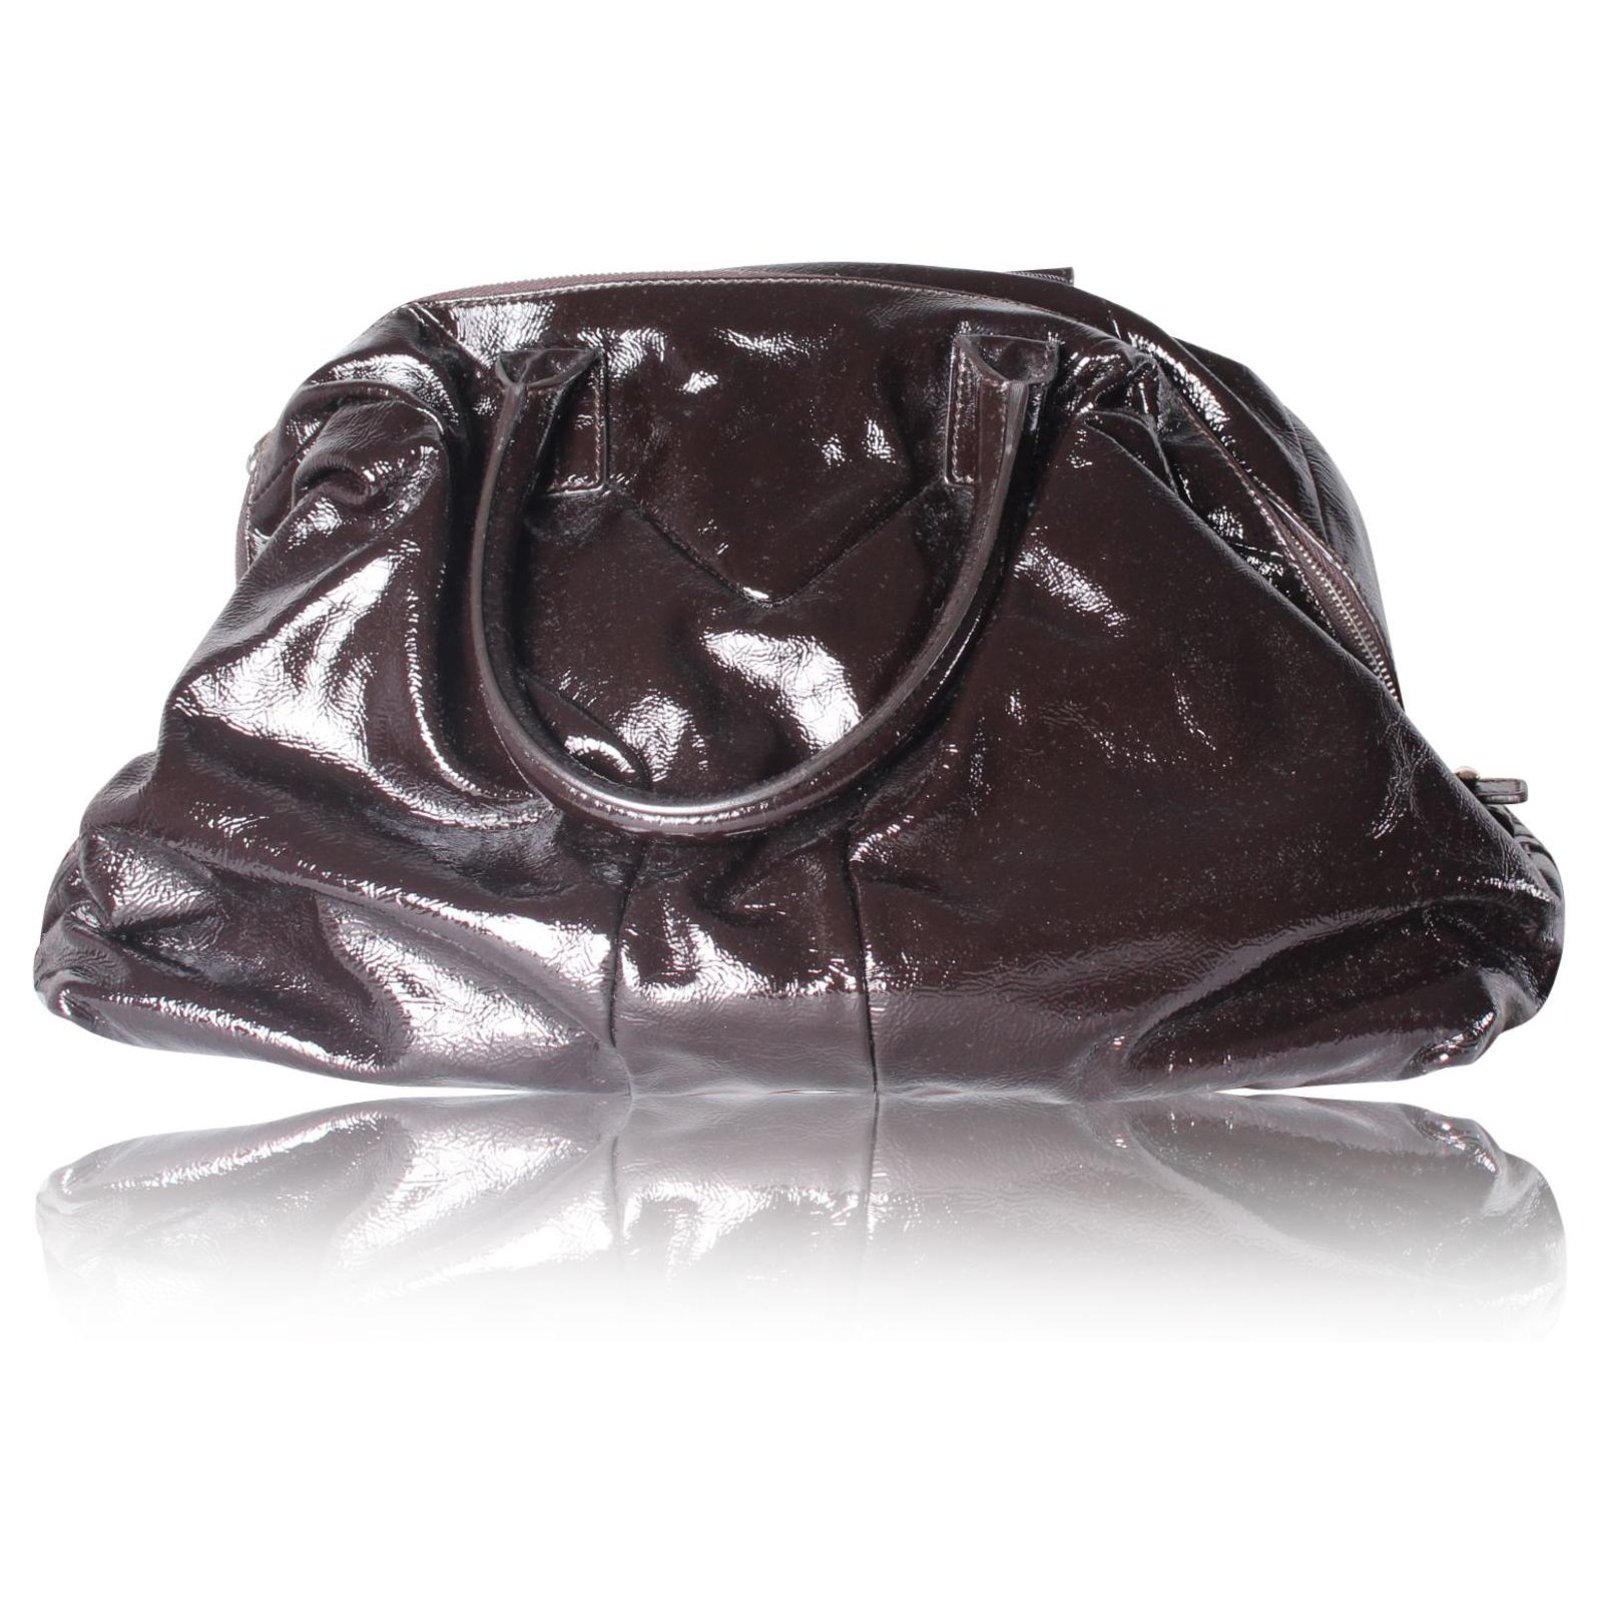 Simple Patent Leather Clutch